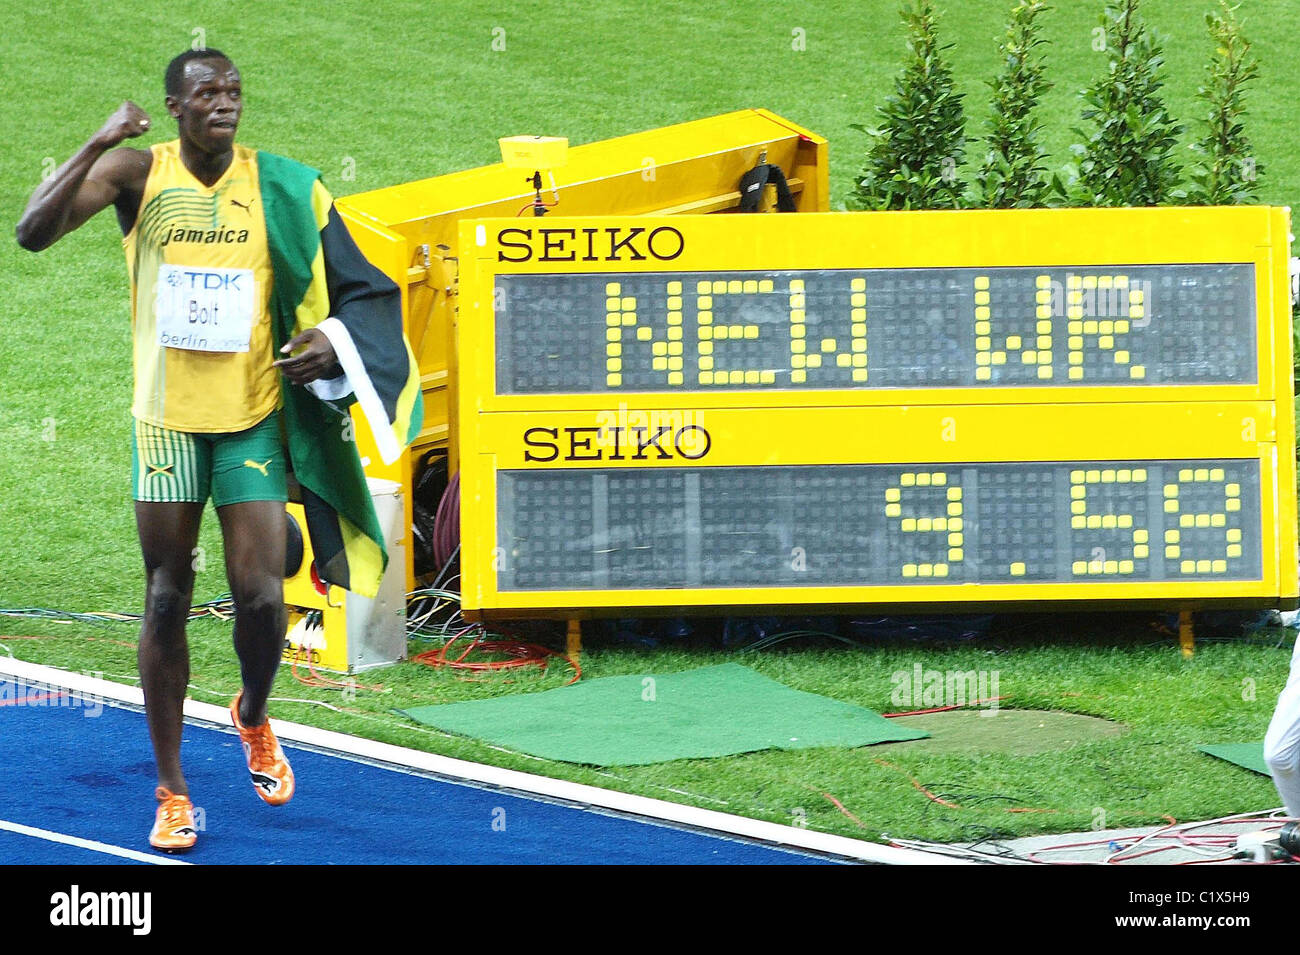 Usain Bolt Breaks His Own World Record In The 100 Metres With A New ...